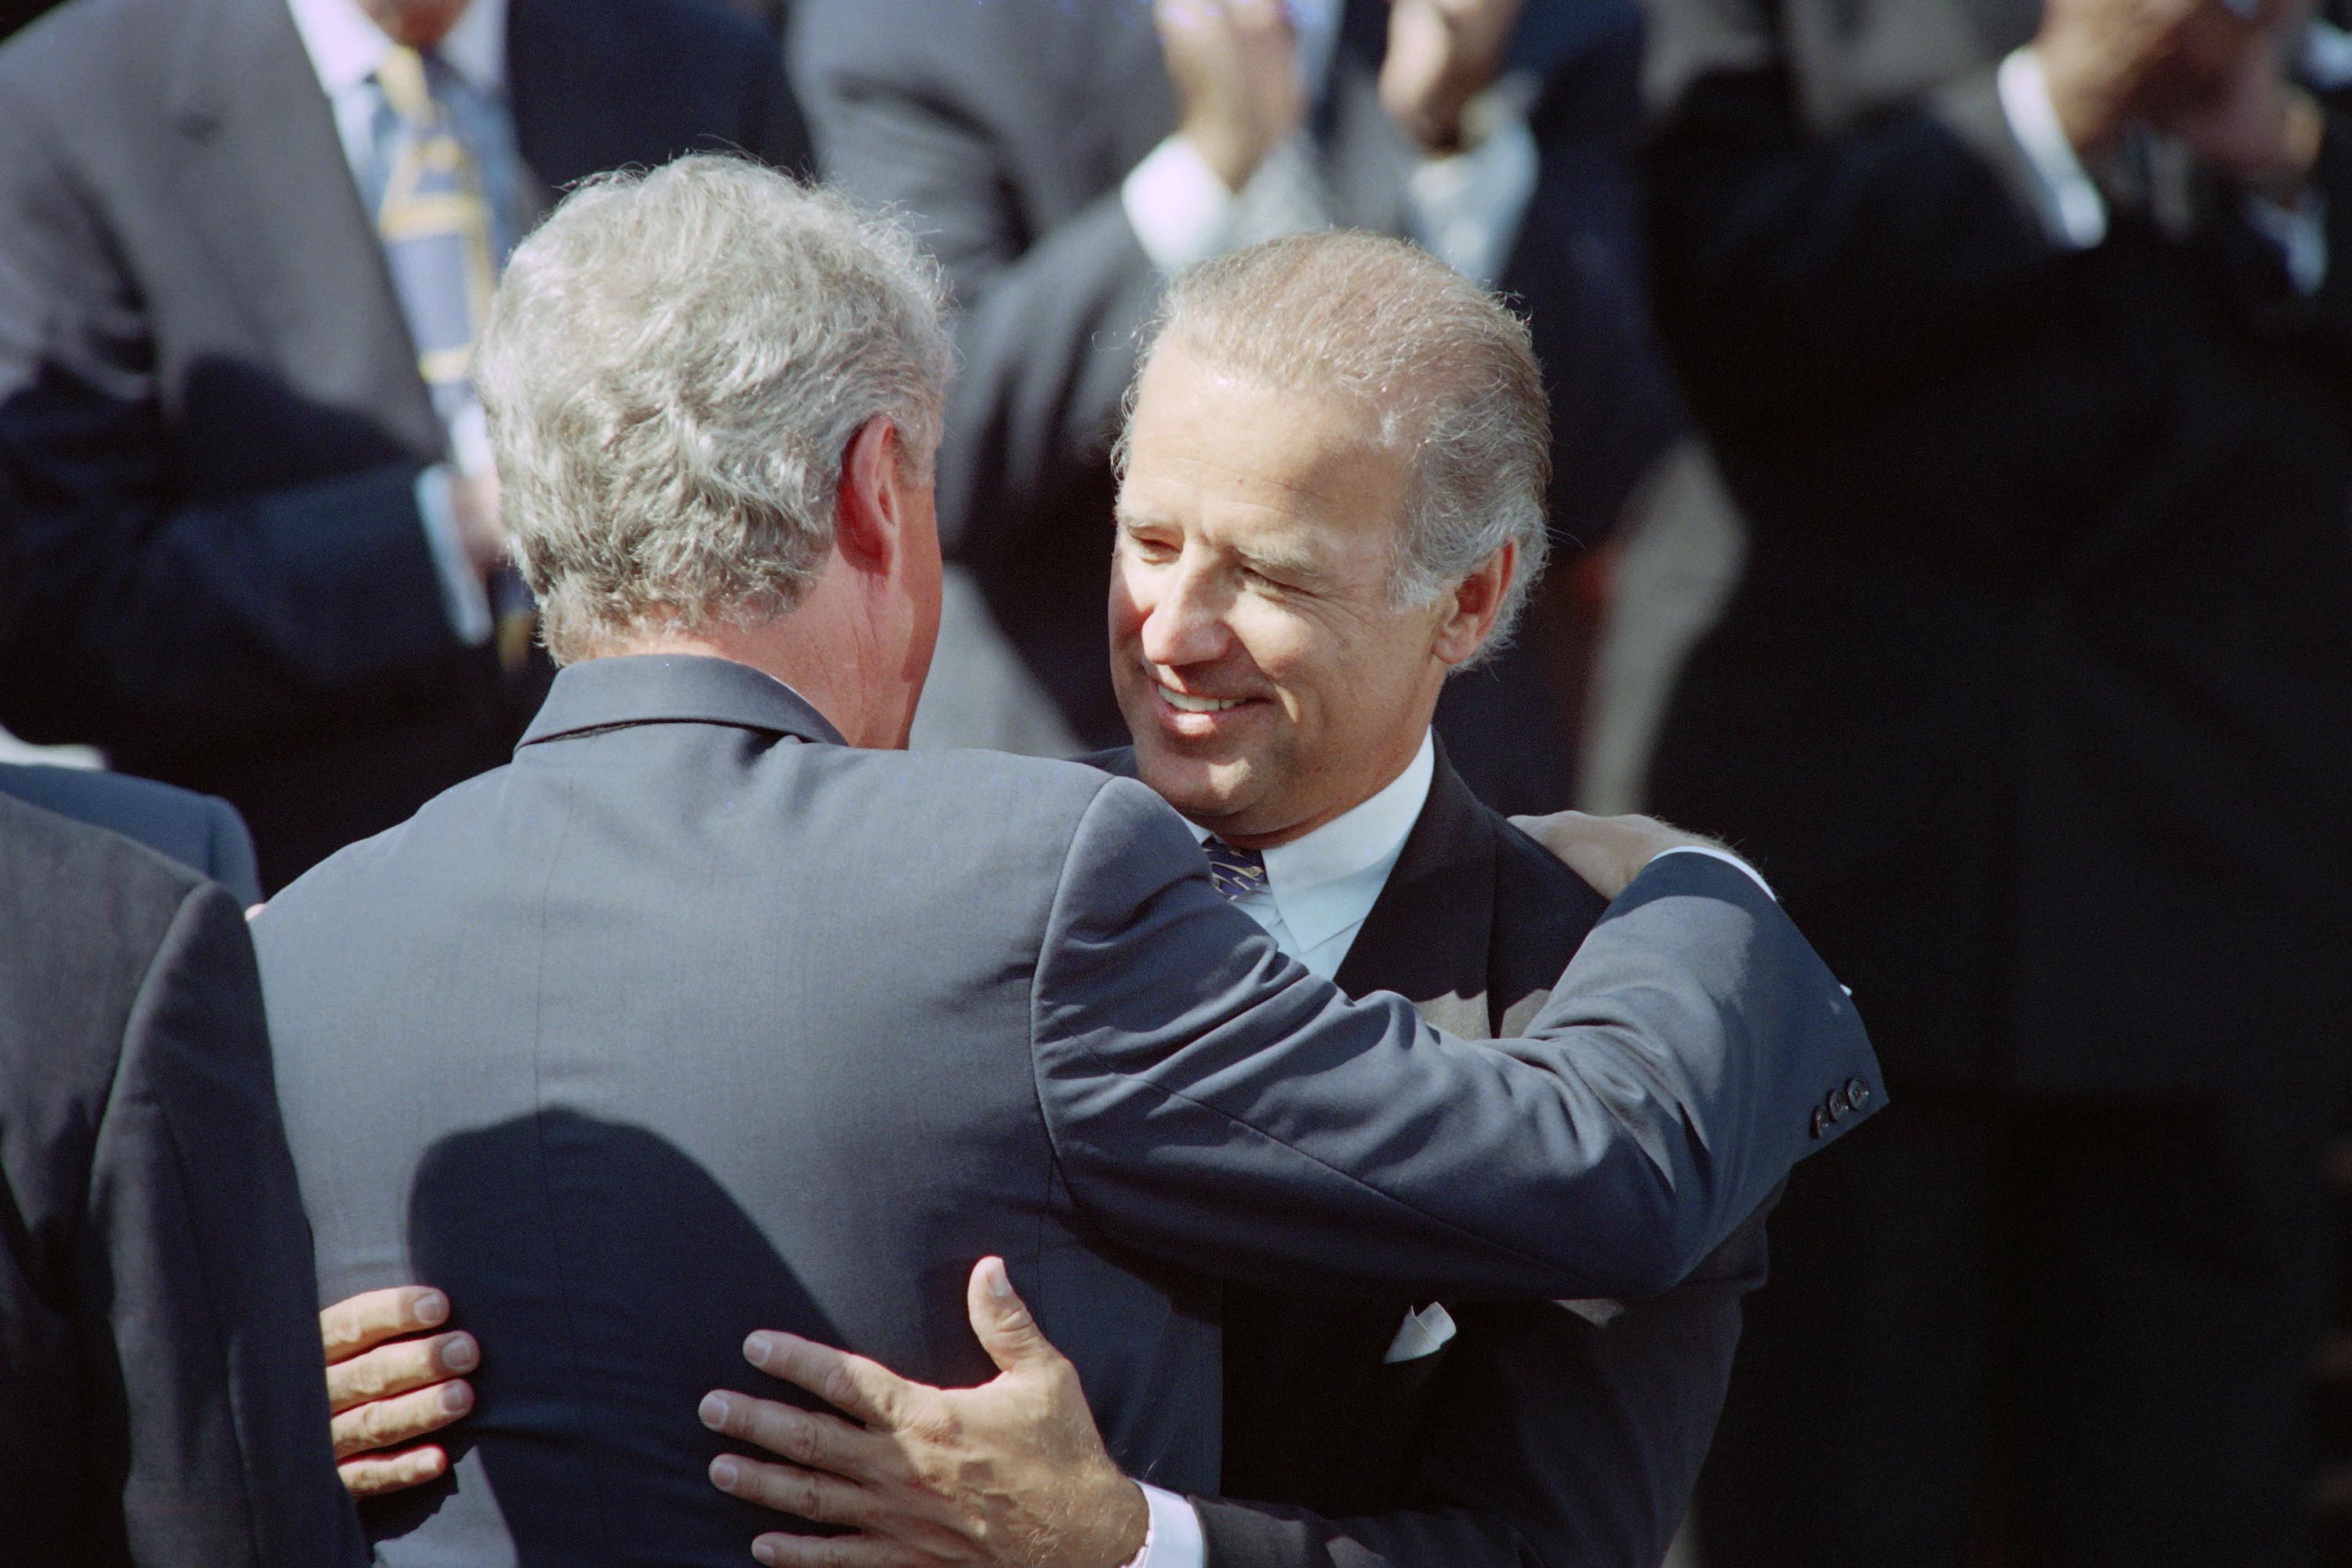 Then-President Bill Clinton hugs then-Sen. Joseph Biden, in September 1994 during a signing ceremony for a crime bill at the White House.